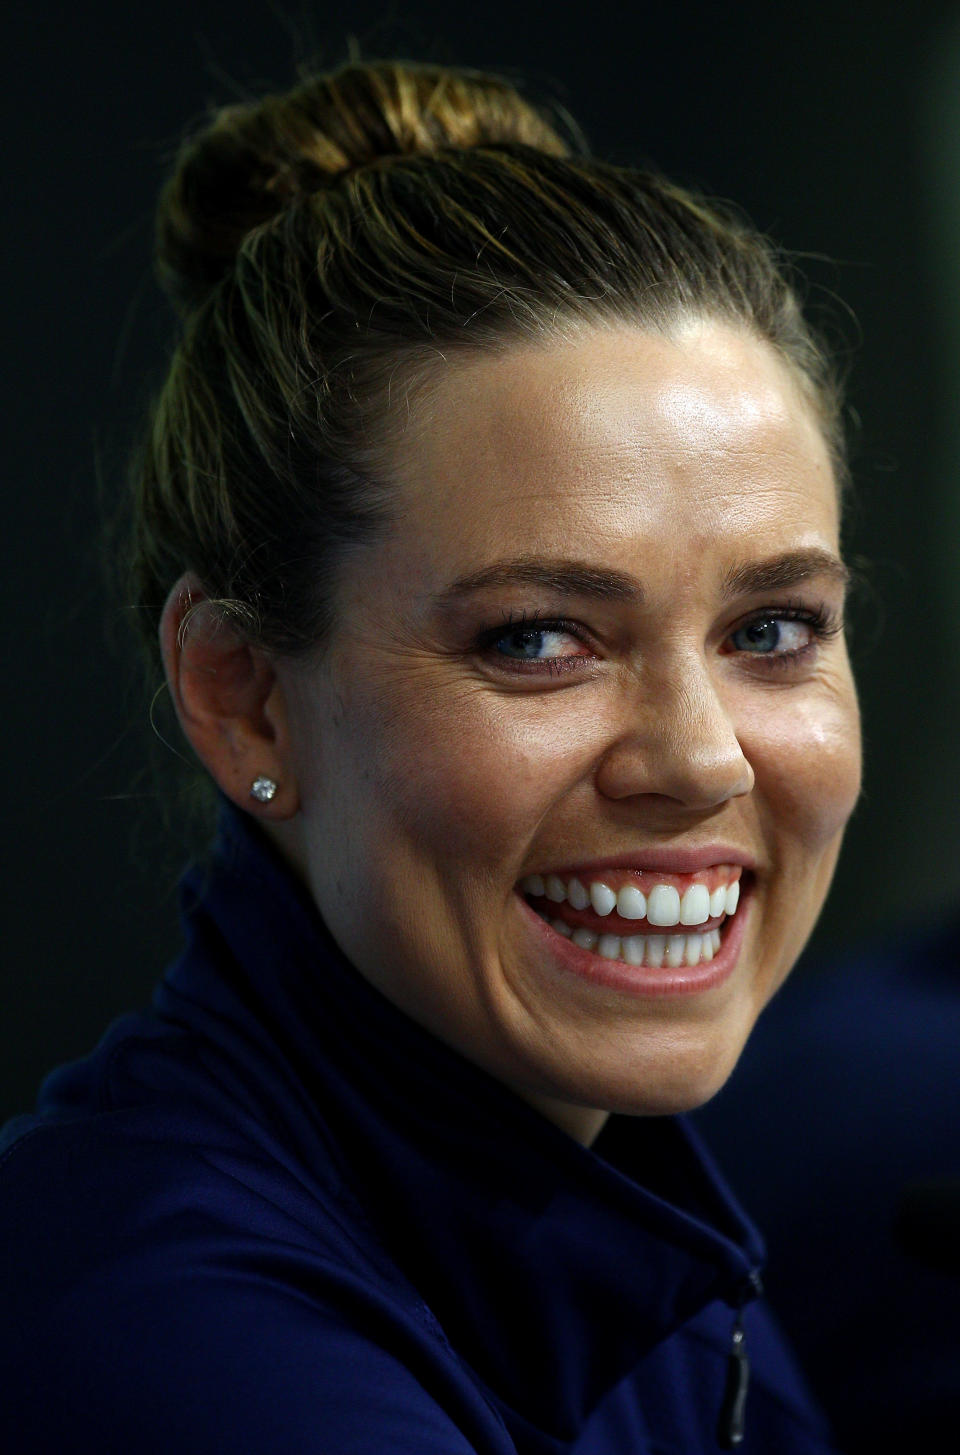 SHANGHAI, CHINA - JULY 23: Natalie Coughlin of the United States participates in a press conference on Day Eight of the 14th FINA World Championships at the Main Press Center of the Oriental Sports Center on July 23, 2011 in Shanghai, China. (Photo by Quinn Rooney/Getty Images)